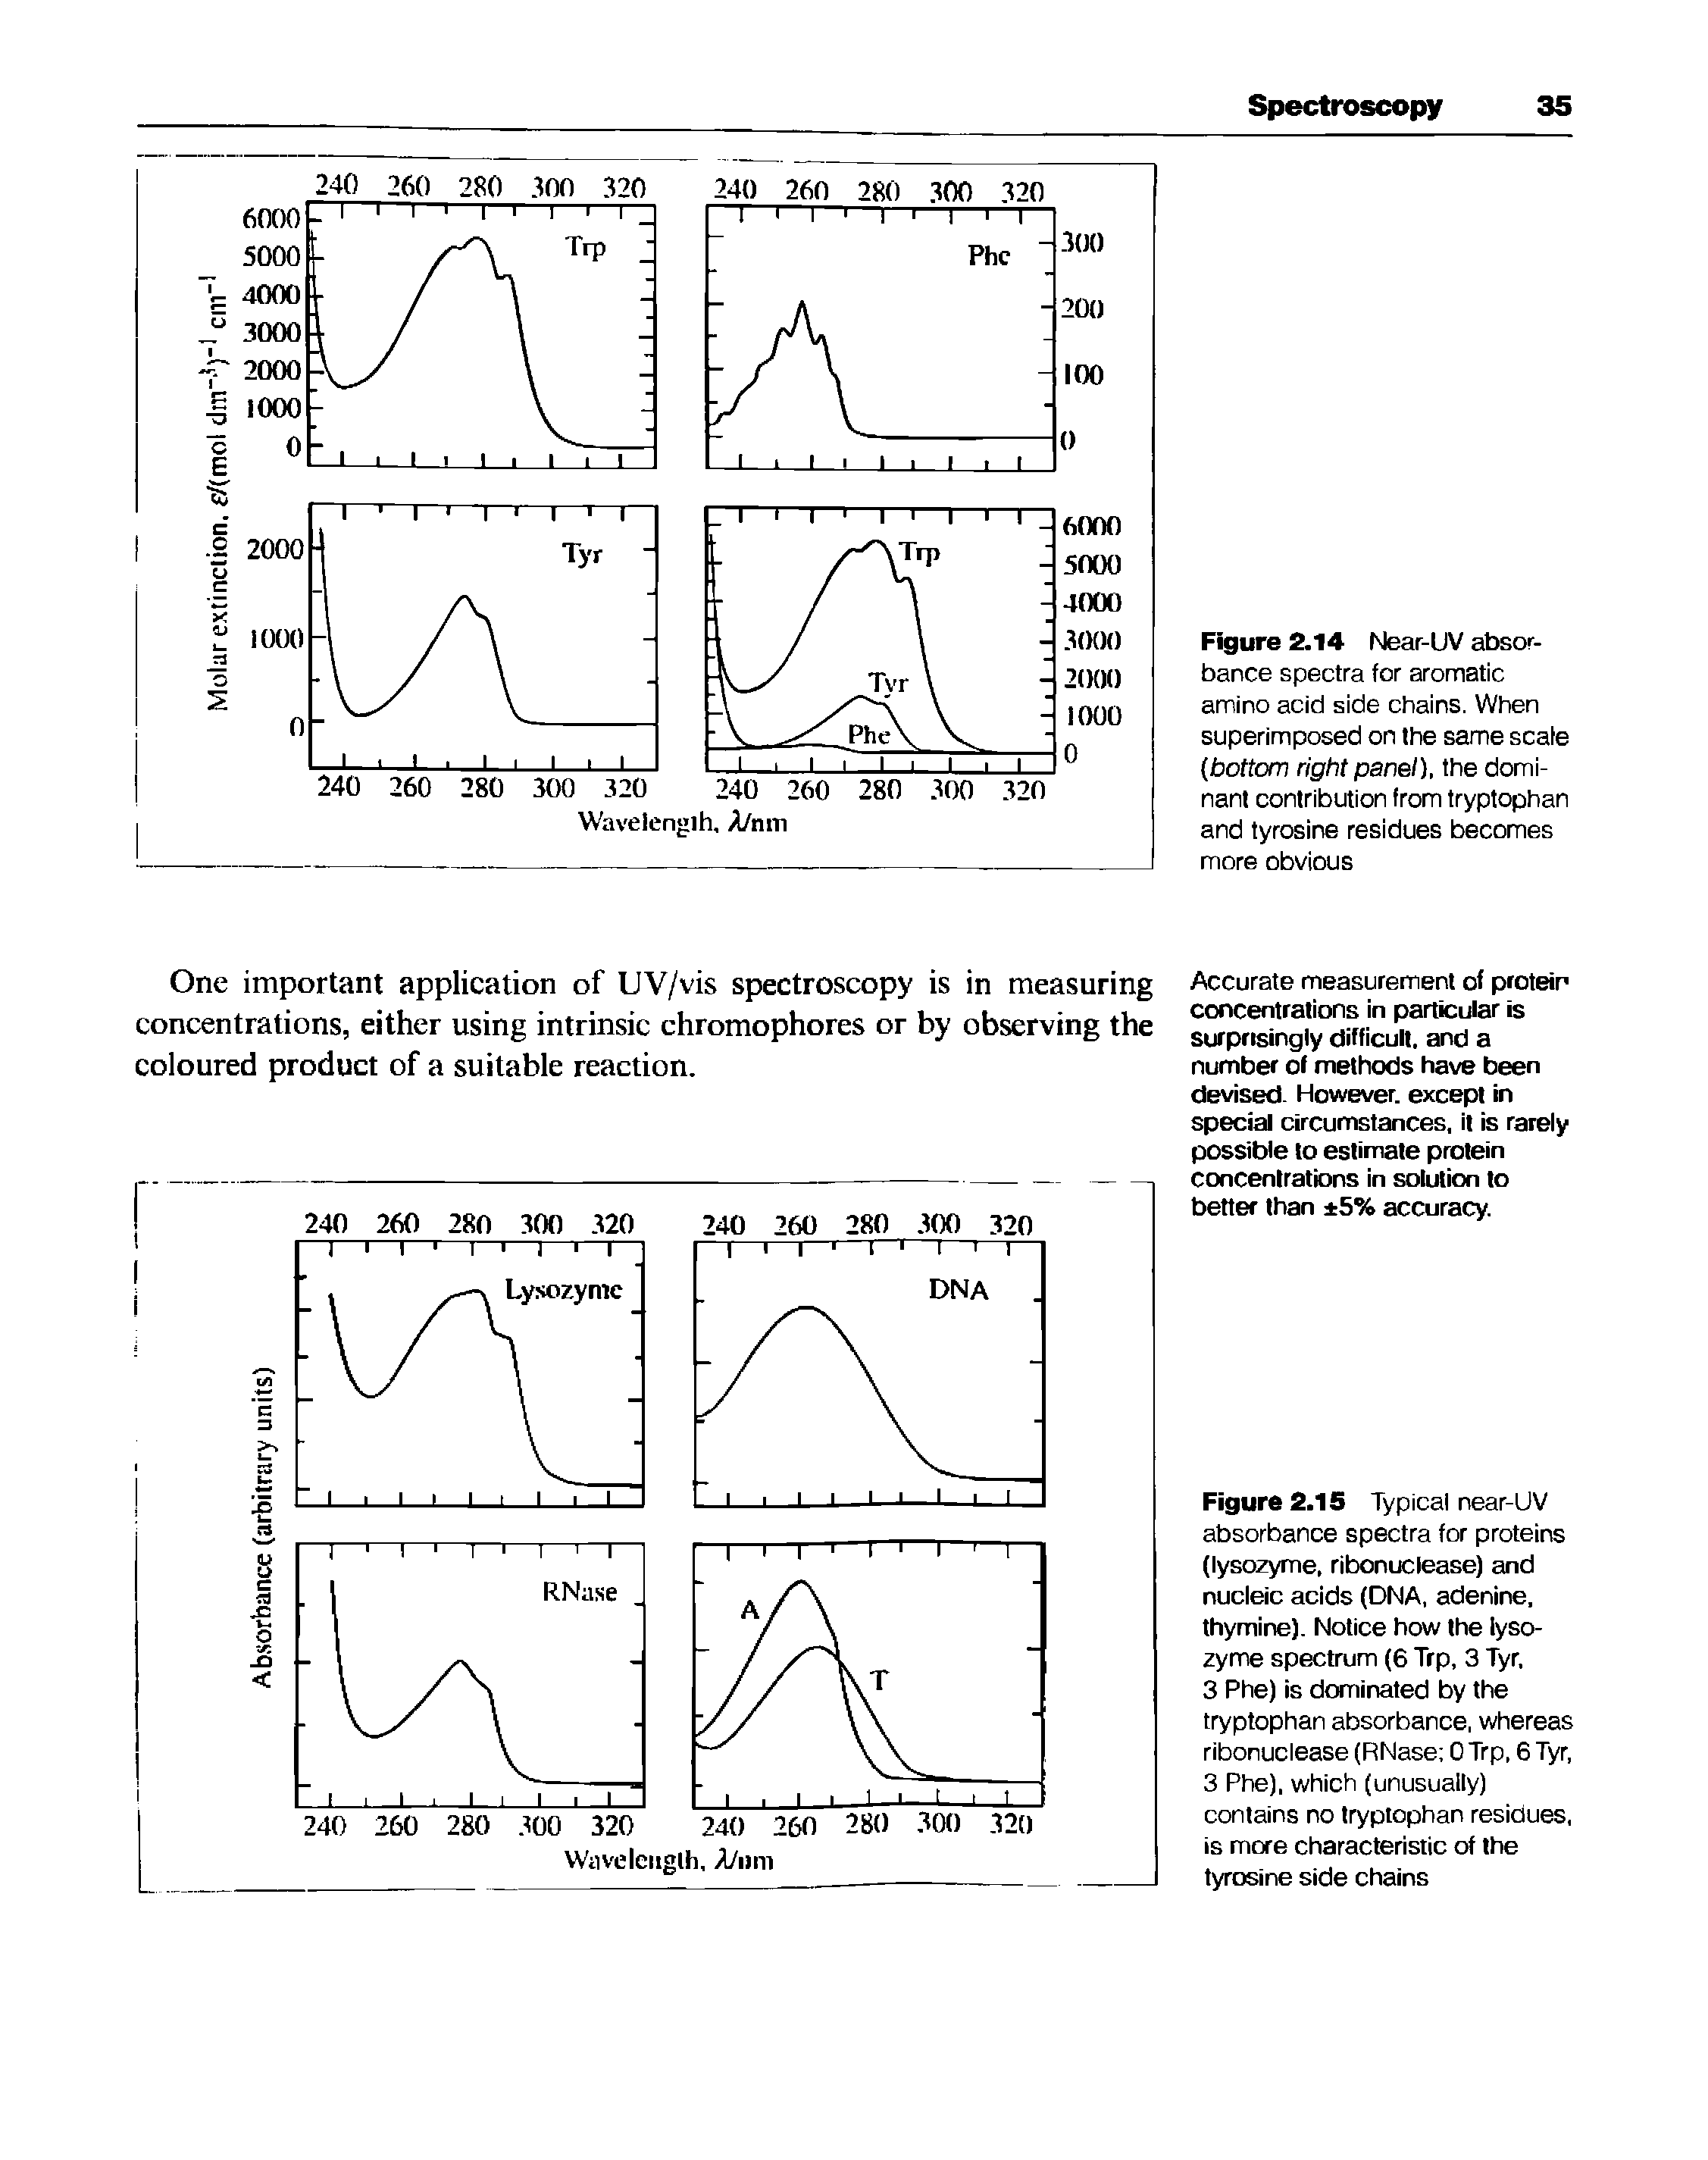 Figure 2.15 Typical near-UV absorbance spectra for proteins (lysozyme, ribonuclease) and nucleic acids (DNA, adenine, thymine). Notice how the lysozyme spectrum (6 Trp, 3 Tyr,...